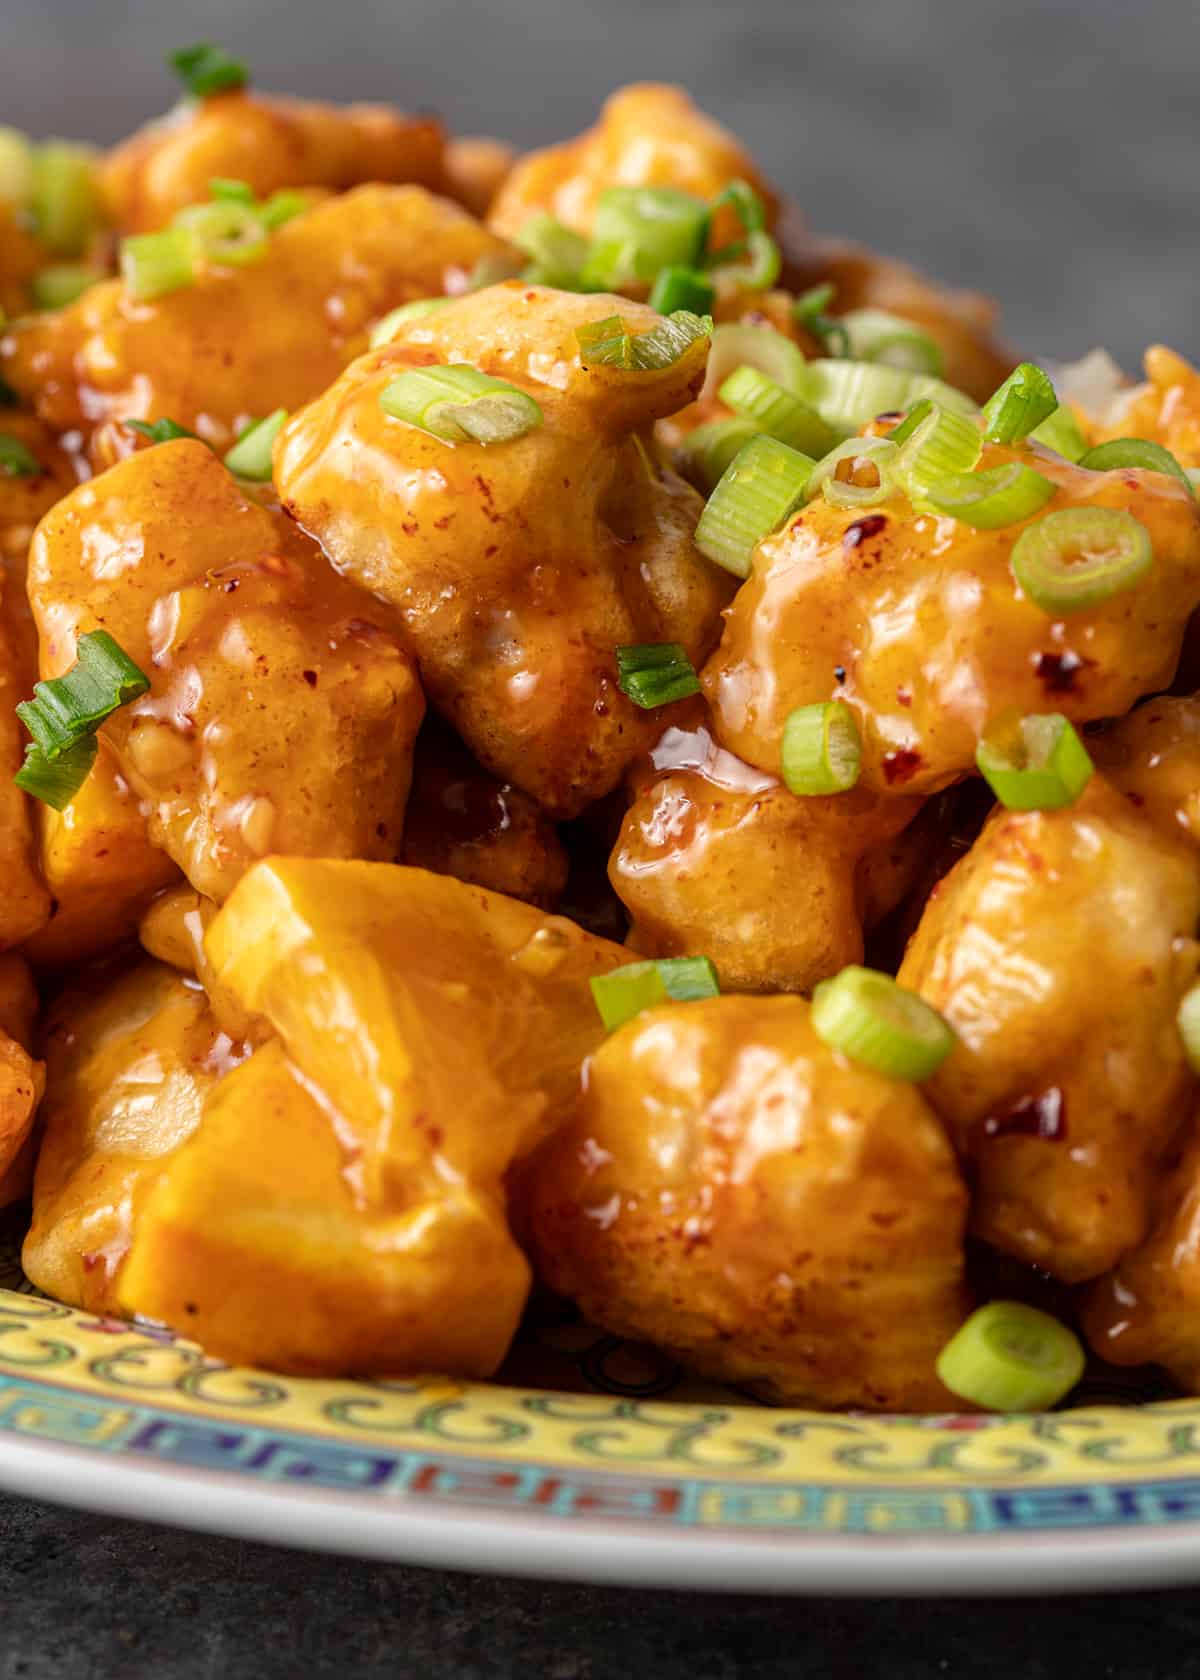 extreme closeup: orange chicken on a ceramic plate with sticky sauce and sliced green onions